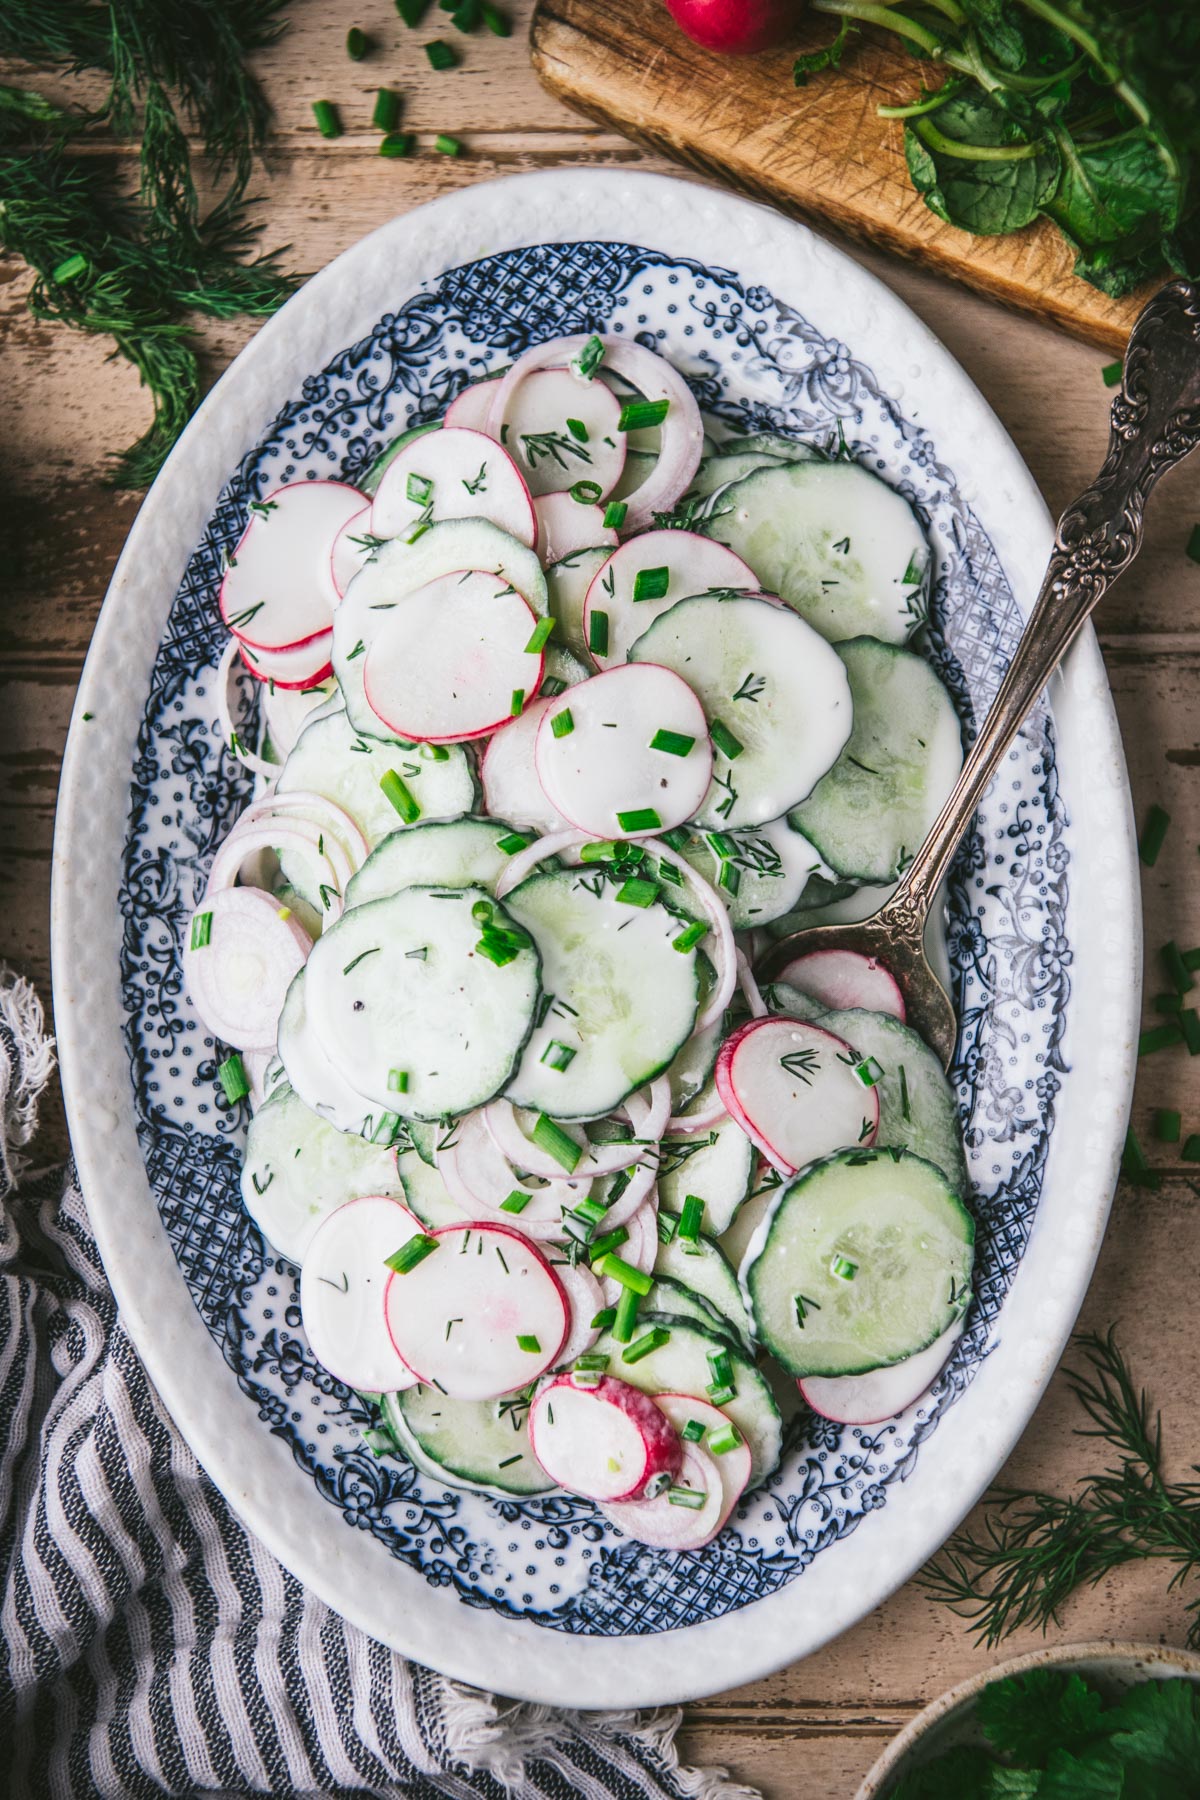 Vintage serving spoon on a blue and white plate full of cucumber radish salad.